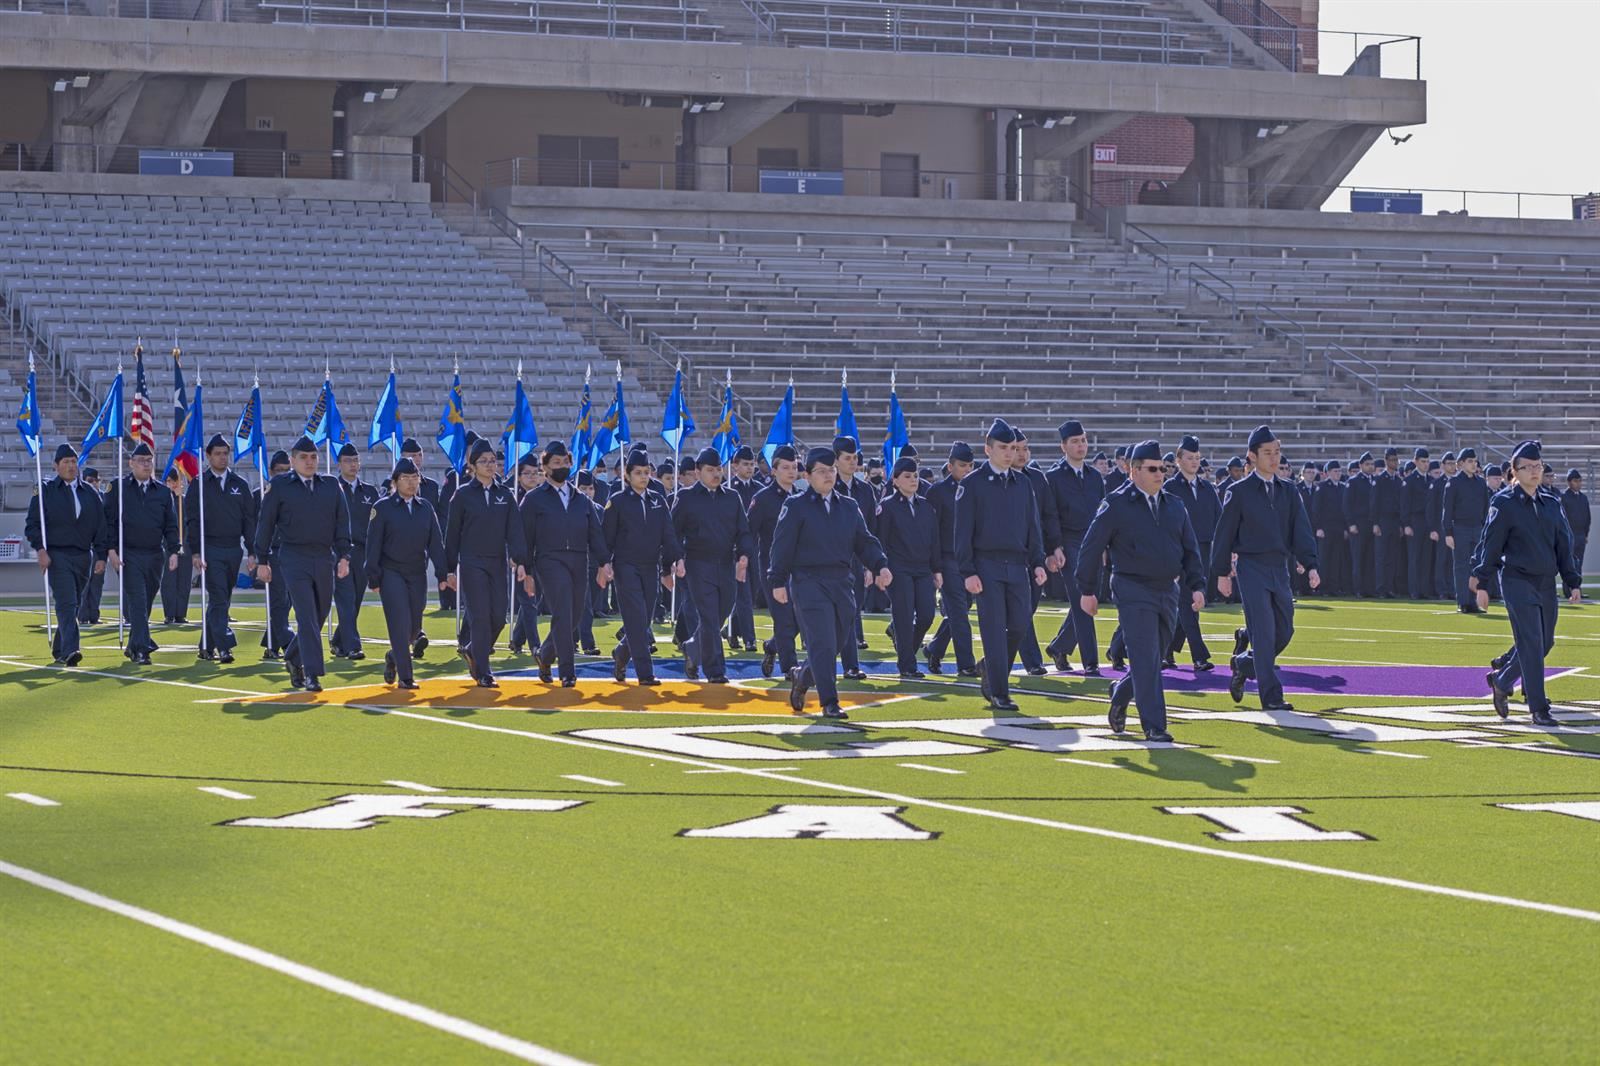 Approximately 850 cadets representing CFISD’s 12 comprehensive high schools and nine JROTC units displayed their discipline.